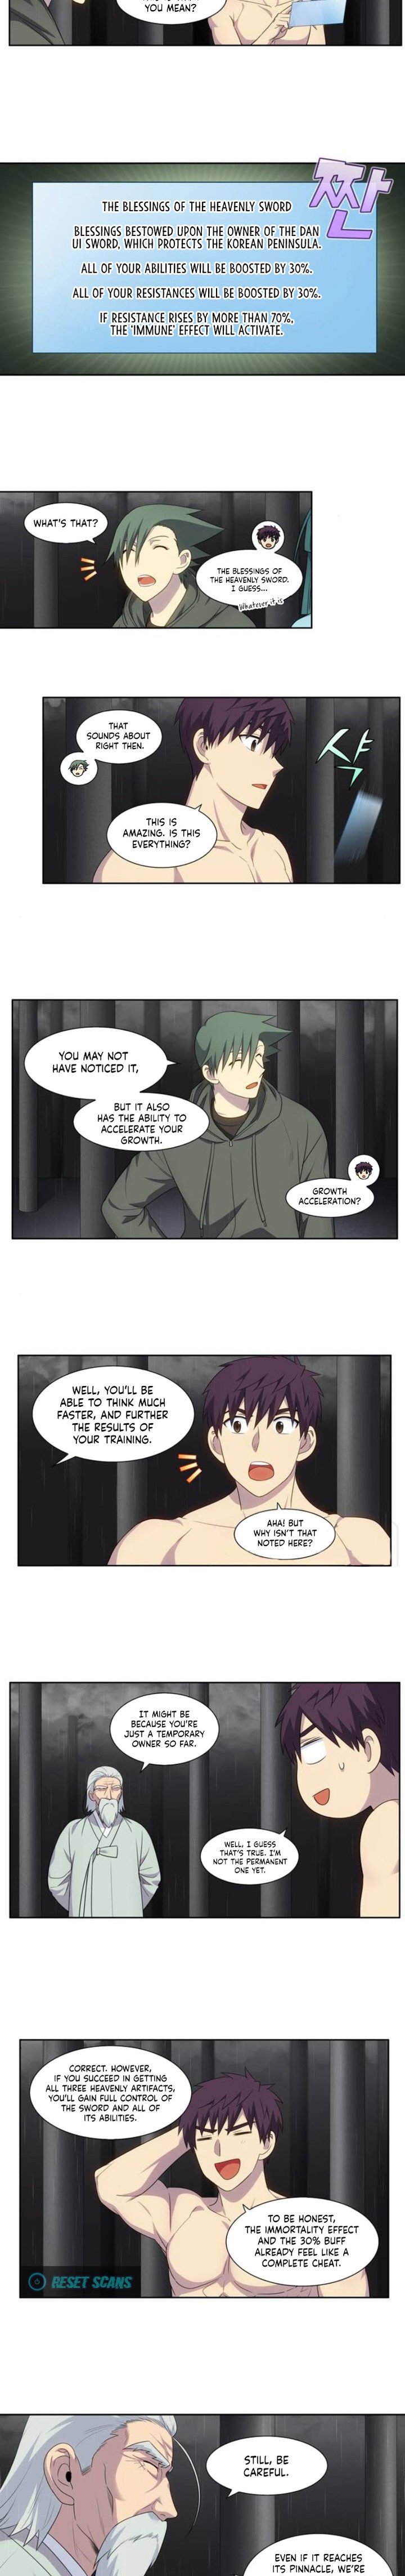 the-gamer-chap-380-1